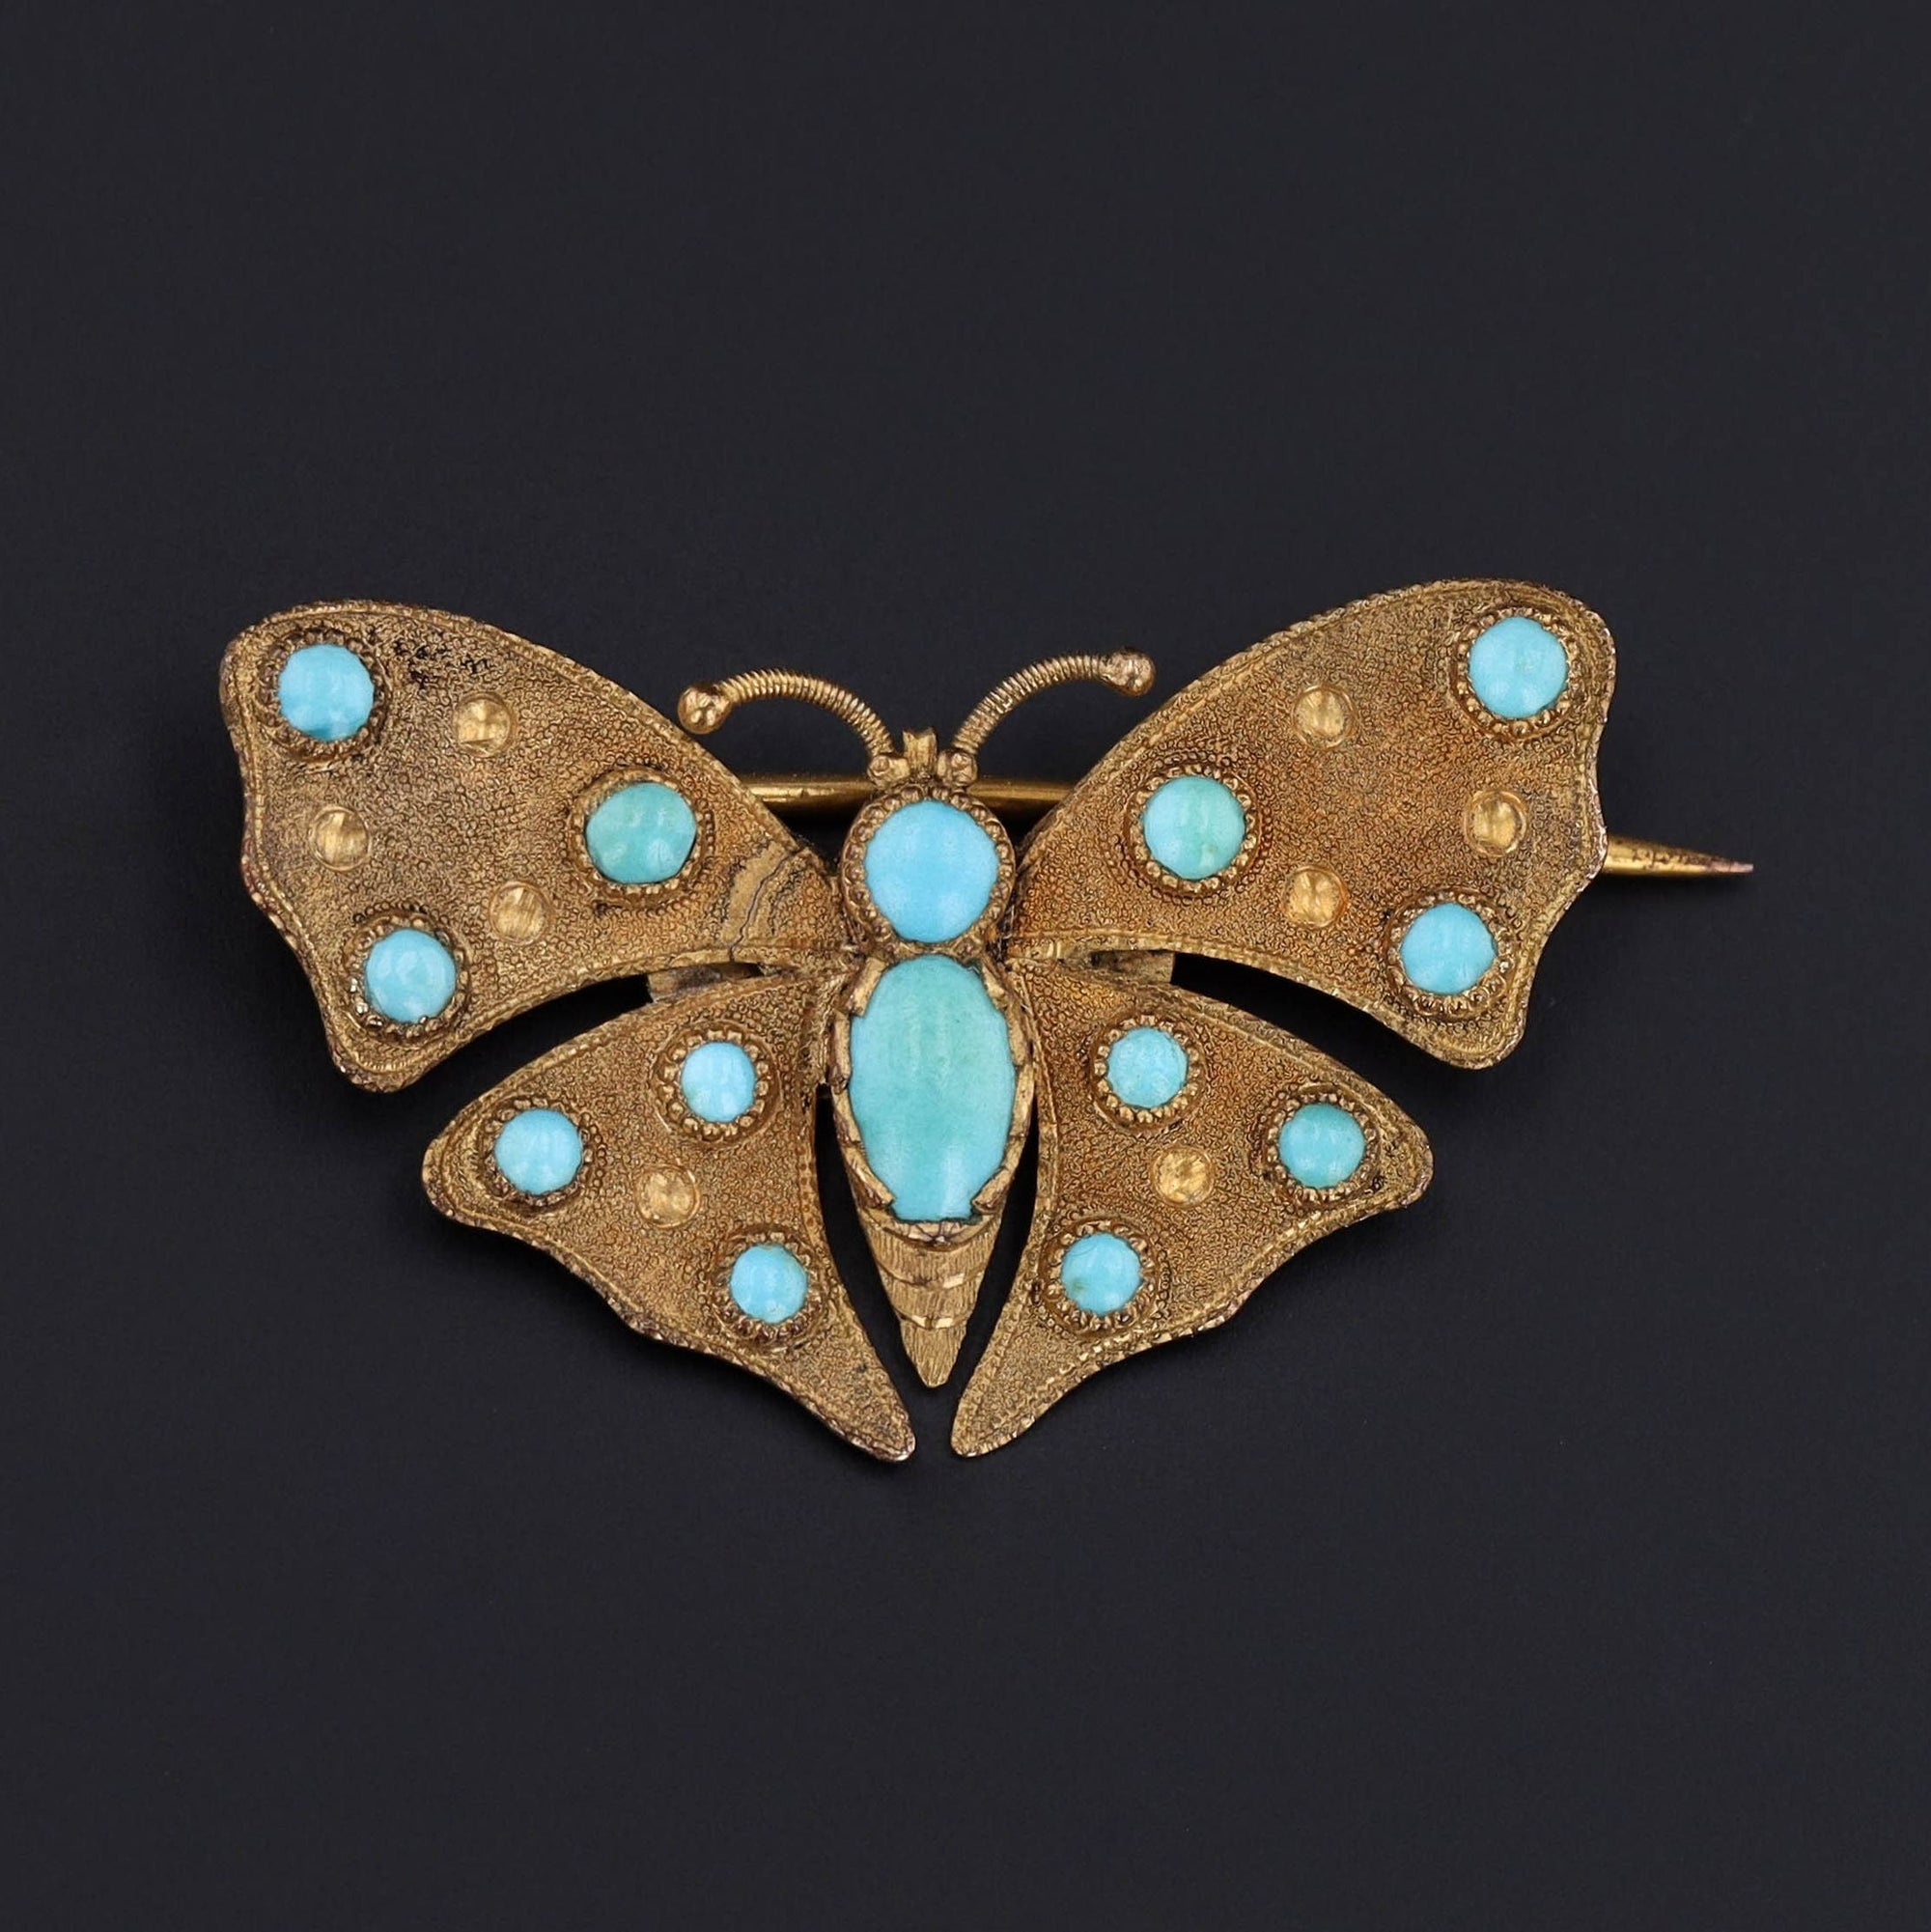 Antique Butterfly Brooch | 14k Gold & Turquoise Brooch 